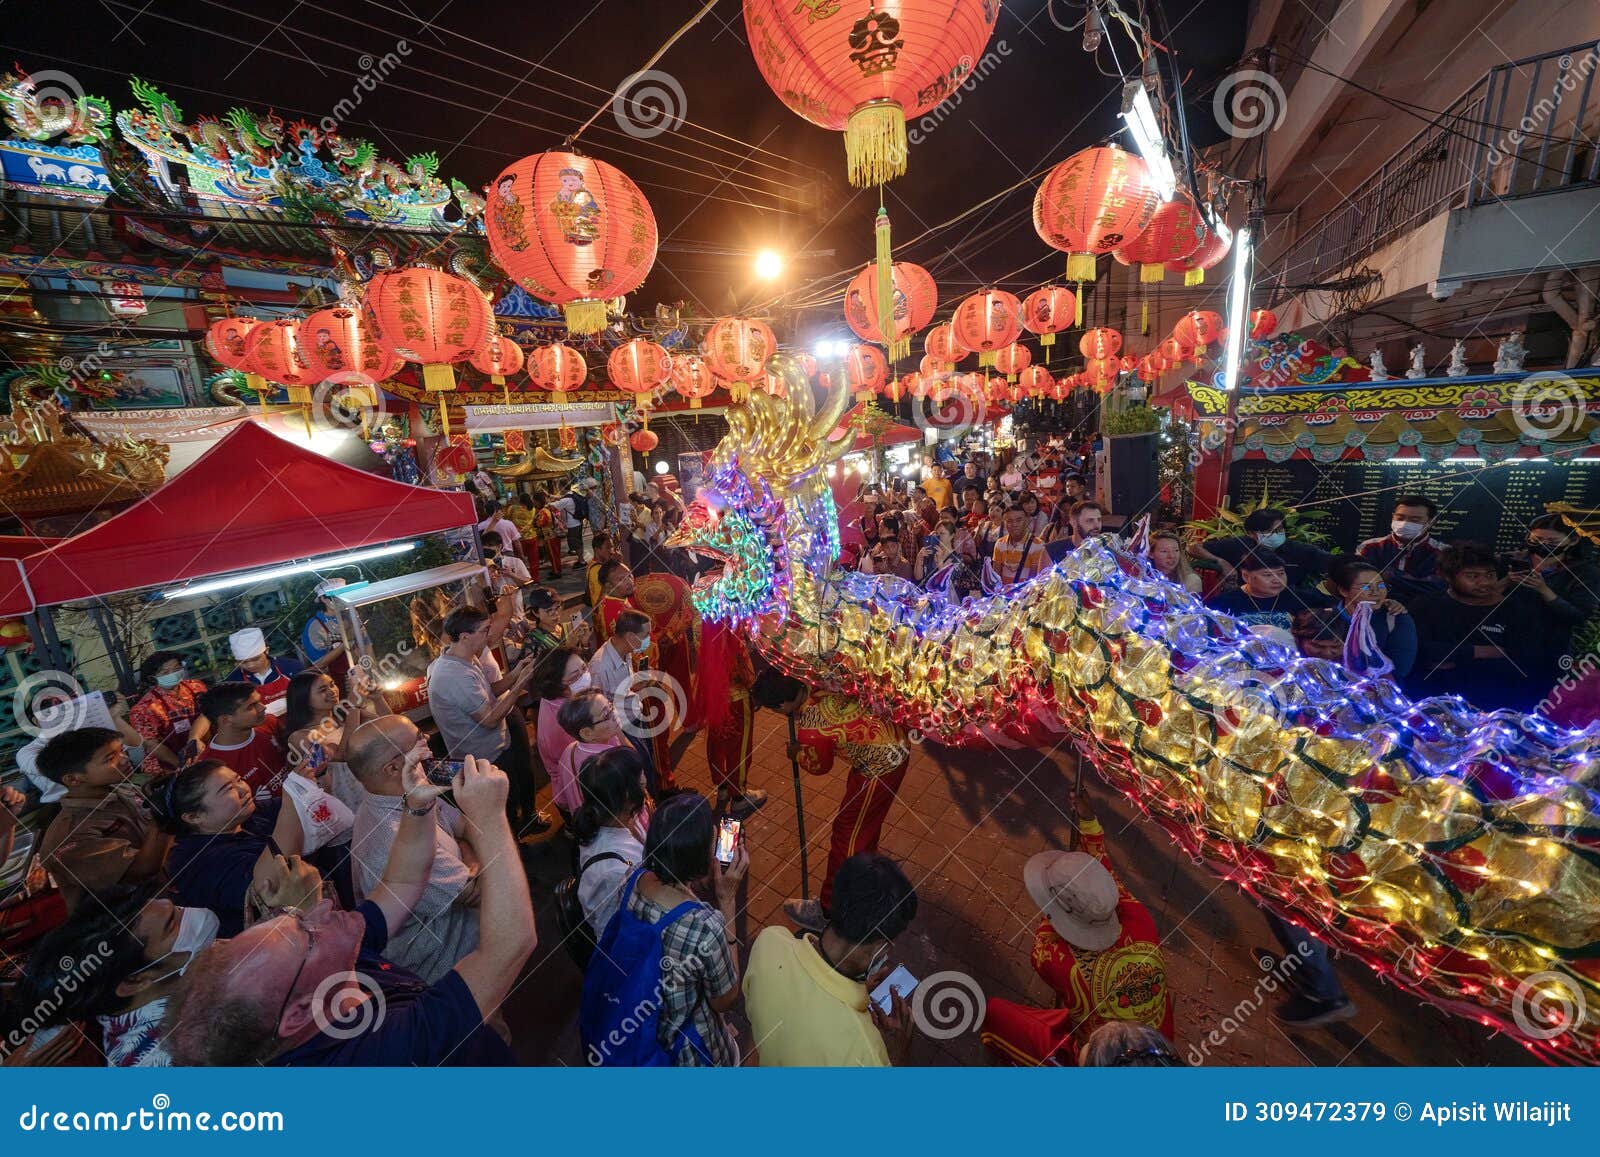 Celebrate Chinese New Year and Pung Tao Kong Brithday in Chiang Mai